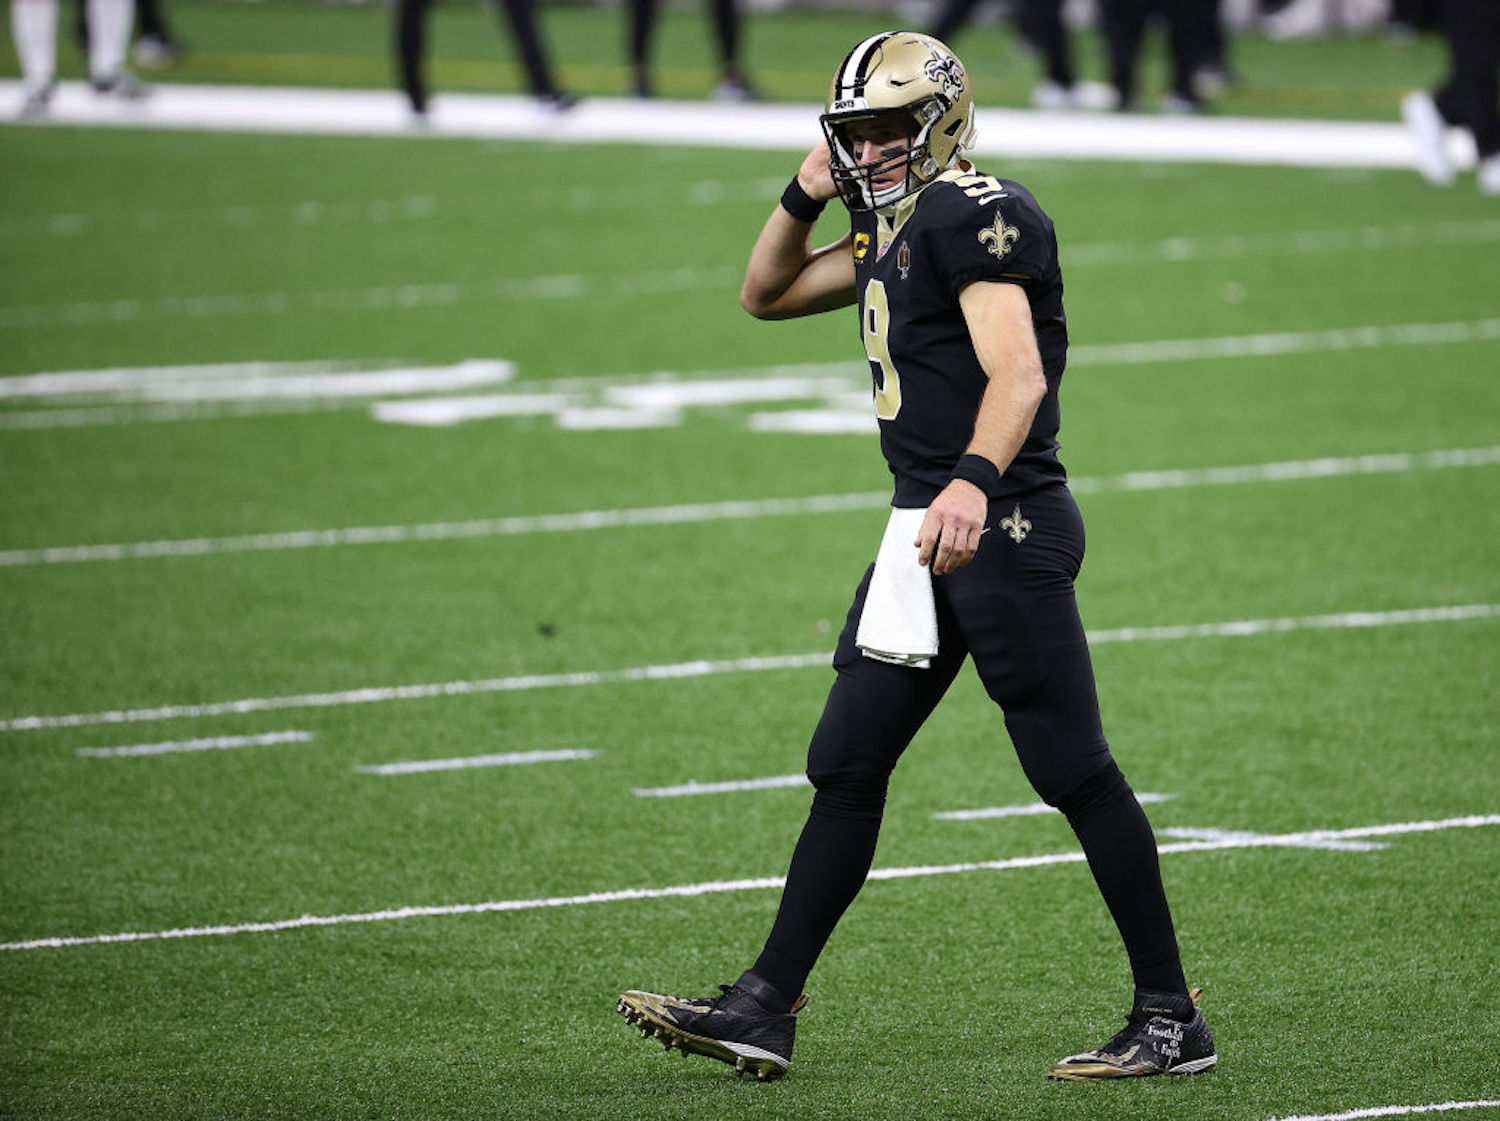 Drew Brees is nearing the end of his career at 41 years old, and his latest injury diagnosis could force him to make an brutal decision.